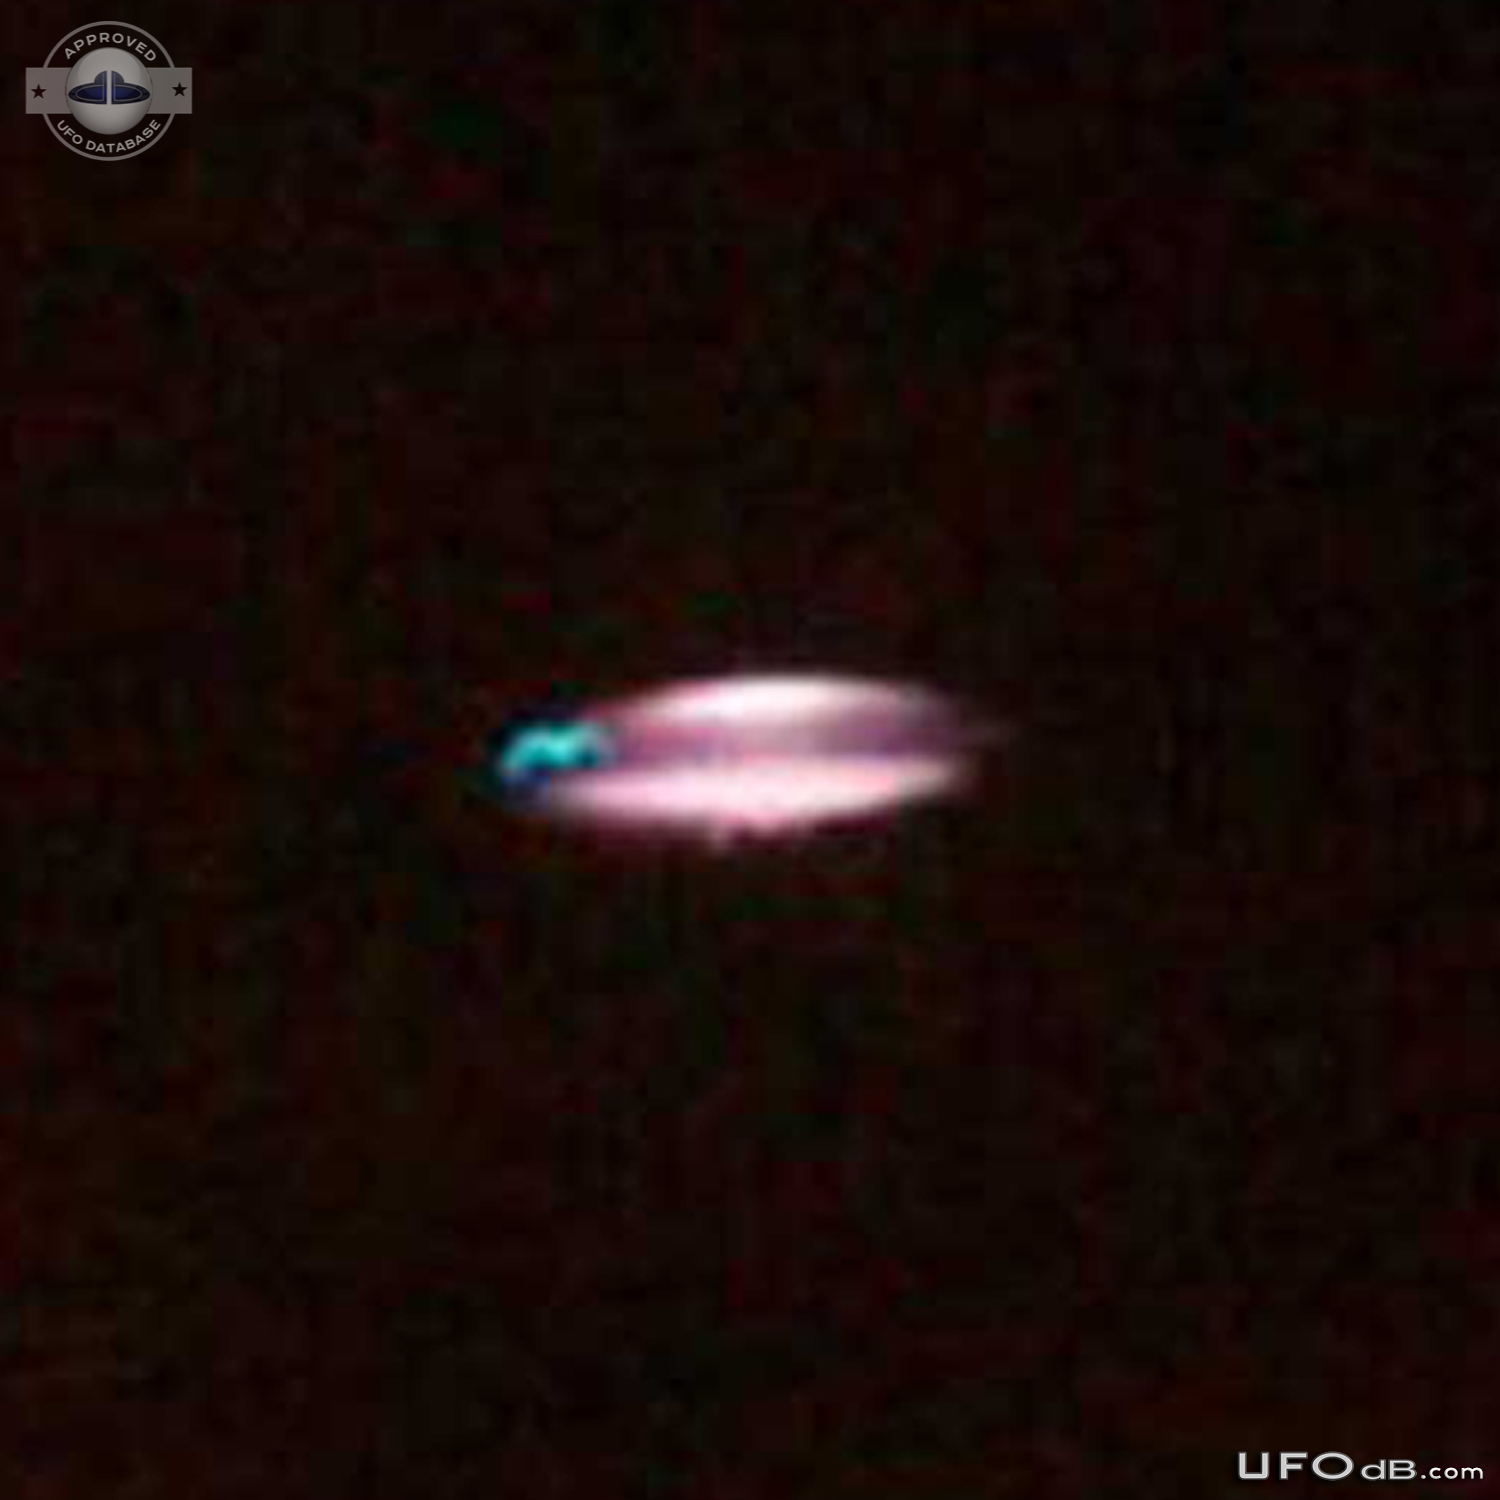 Clear Picture of UFO taken in the night Los Angeles, California | 2012 UFO Picture #397-3